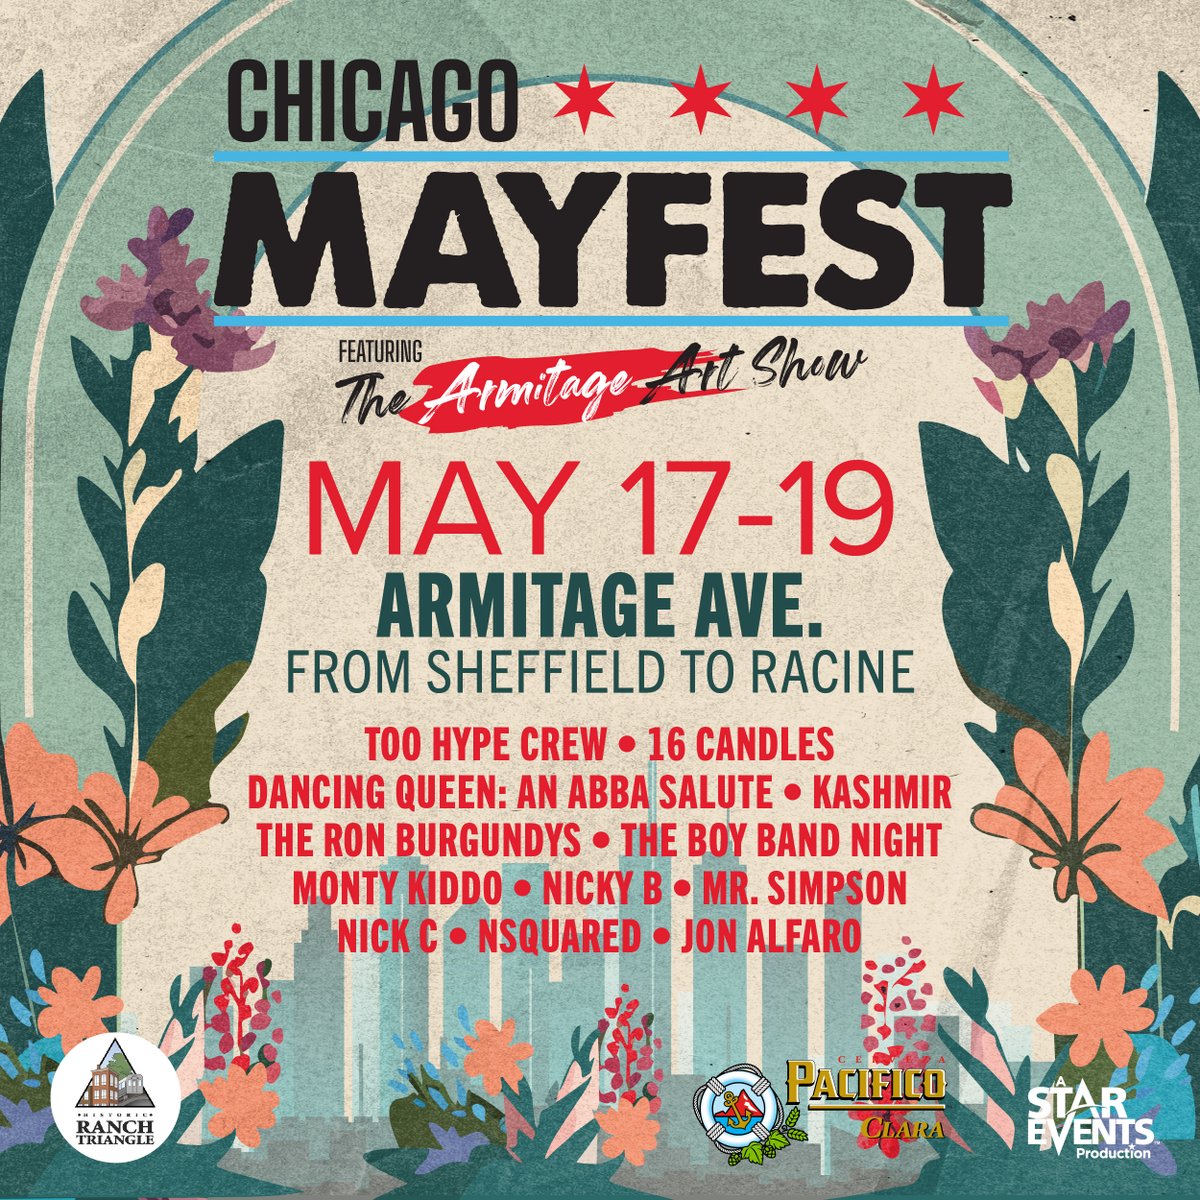 Chicago Mayfest kicks off the summer festival season on May 17th through the 19th at Lincoln Park! Festival-goers can enjoy live music and and a variety of delicious food and libations, all while perusing work from acclaimed local artists and artisans. t.dostuffmedia.com/t/c/s/145678